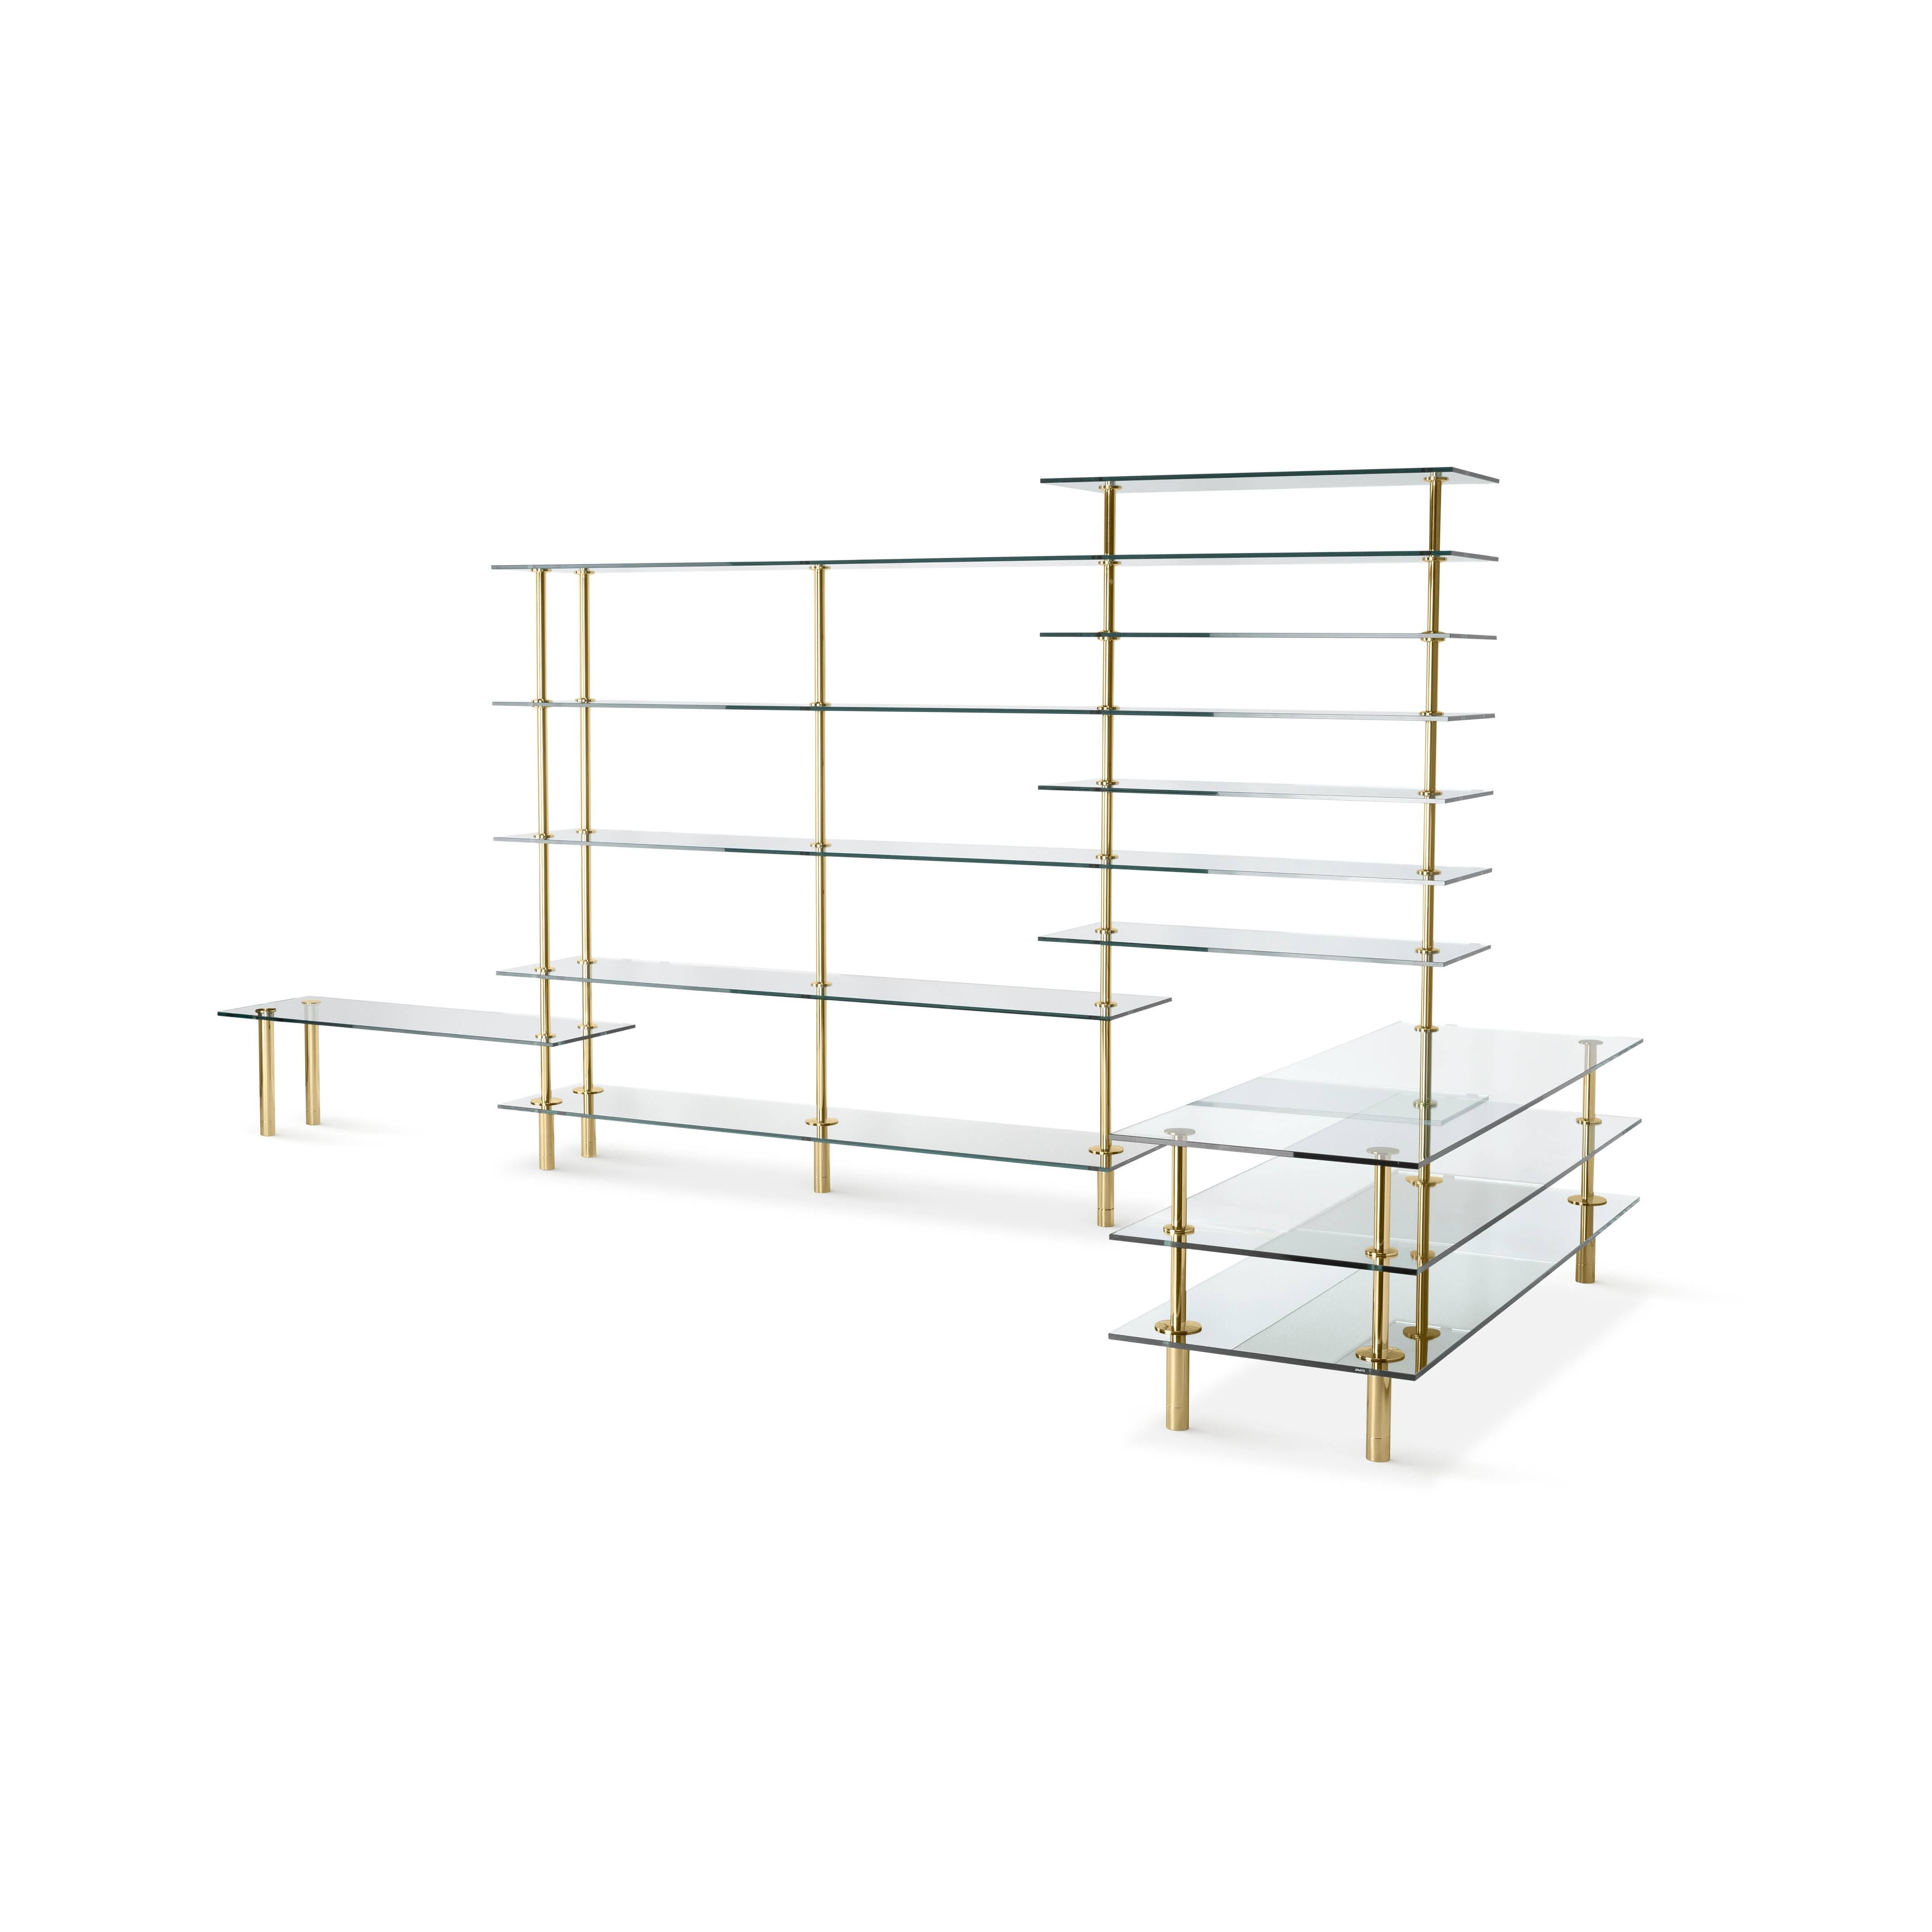 Legs crystal and polished brass angular bookcase designed by Paolo Rizzatto for Ghidini, 1961

Dimensions: 420 x 171 x 40 x 90H cm.